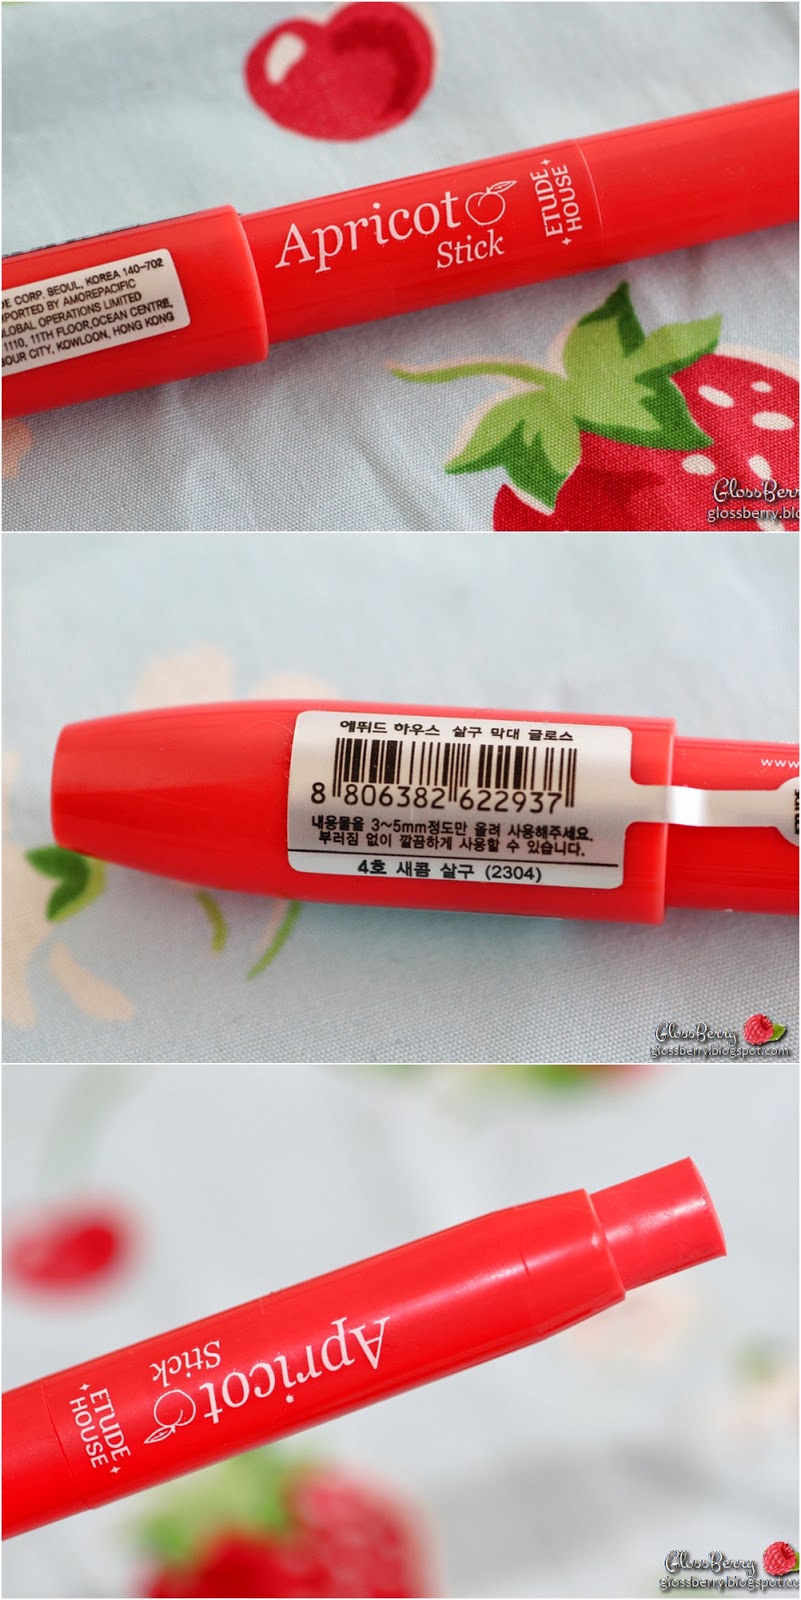 swatch apricot stick 04 review swatches glossberry beauty blog גלוסברי שפתון אטיוד האוס בלוג איפור וטיפוח